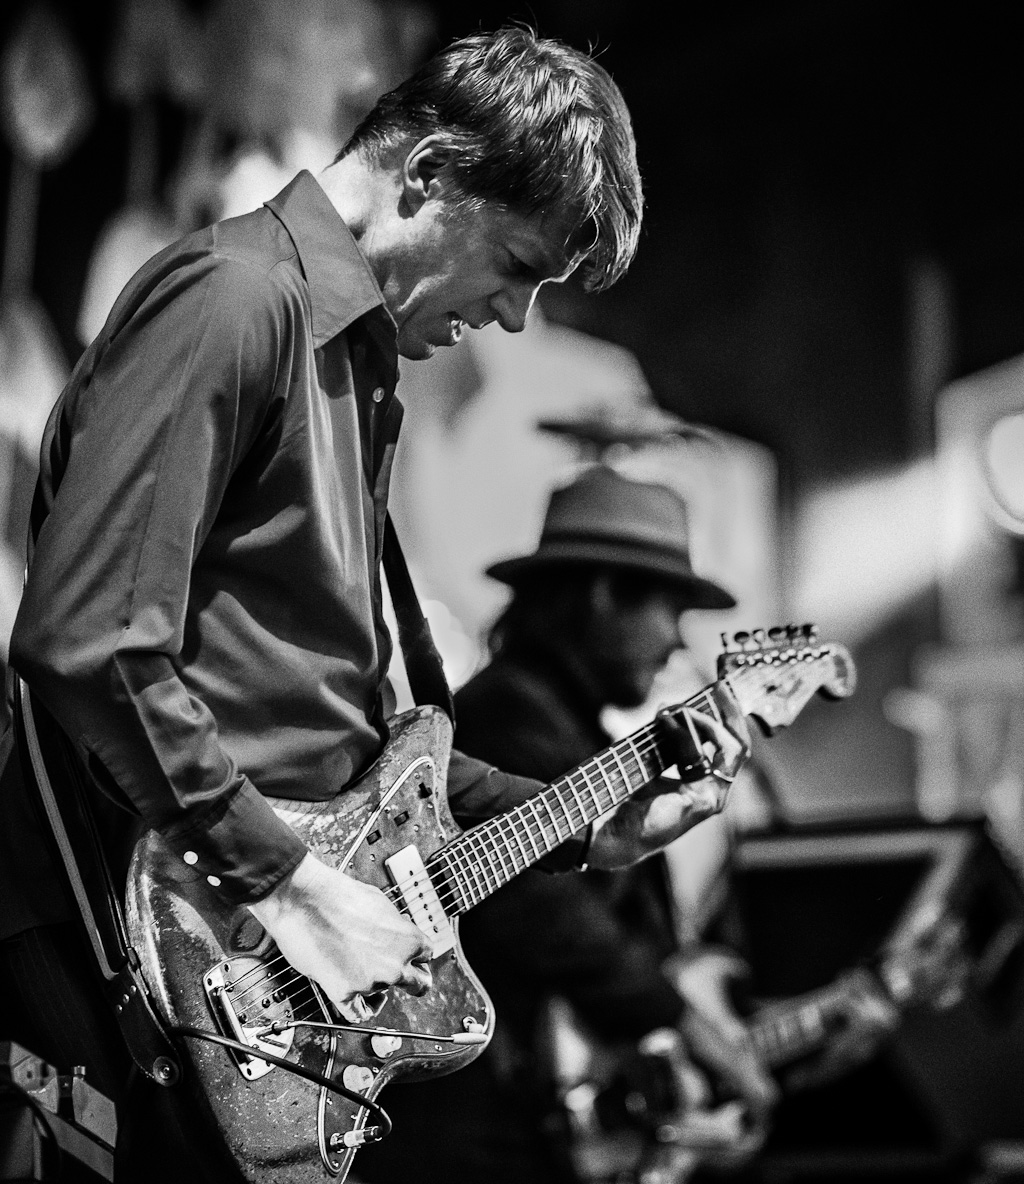 Nels Cline of Wilco at Red Butte